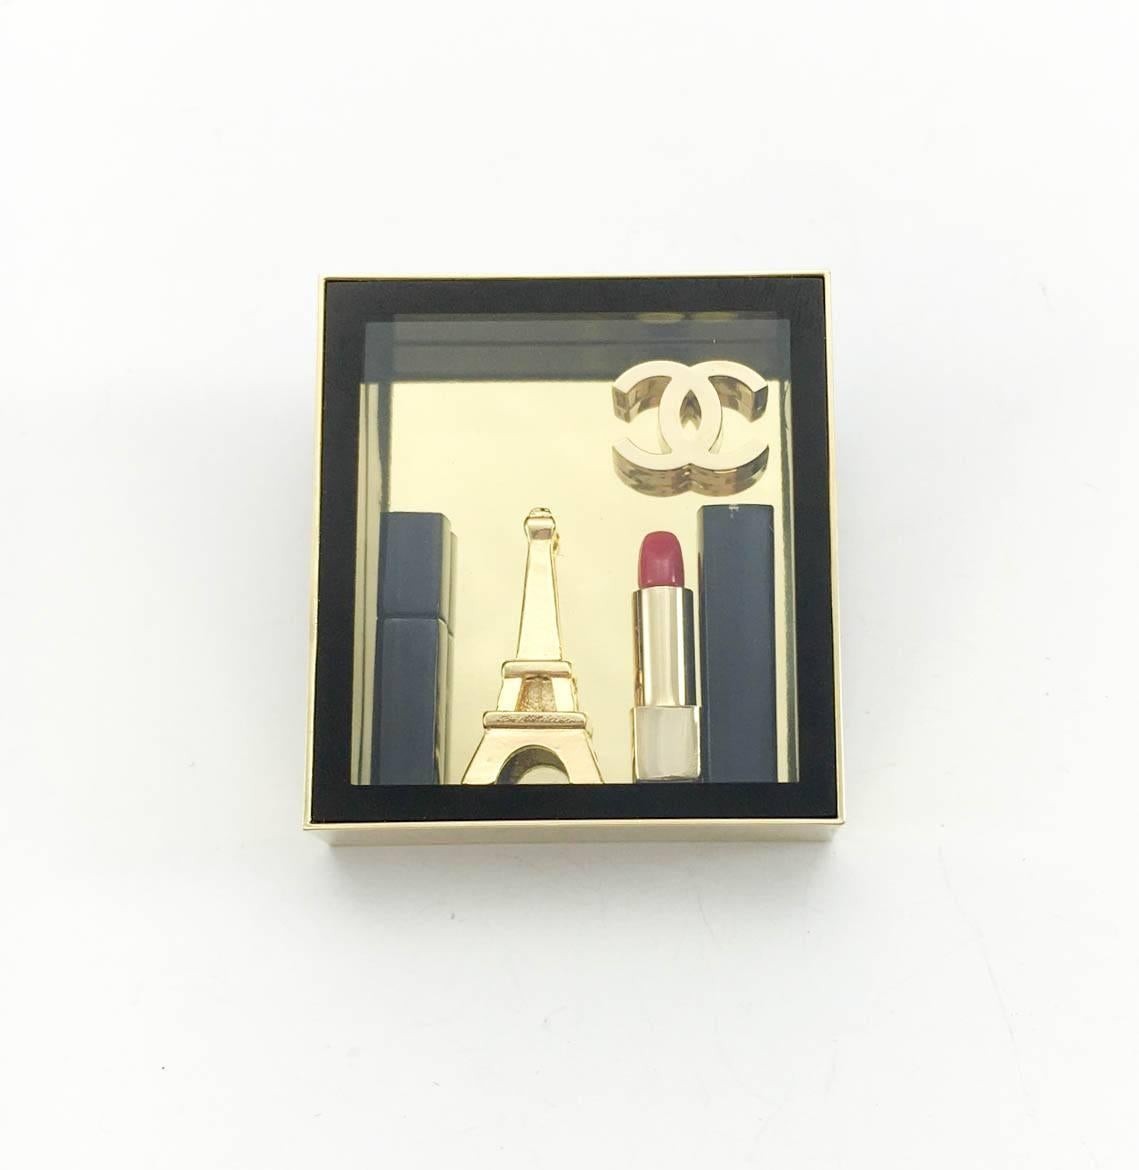 Very cute Chanel Brooch. This was probably a limited edition gift by Chanel that was never sold. The brooch features the iconic Eiffel Tower and Chanel ‘CC’ logo, as well as lipstick and mascara. It comes in its original box. This is a very fun